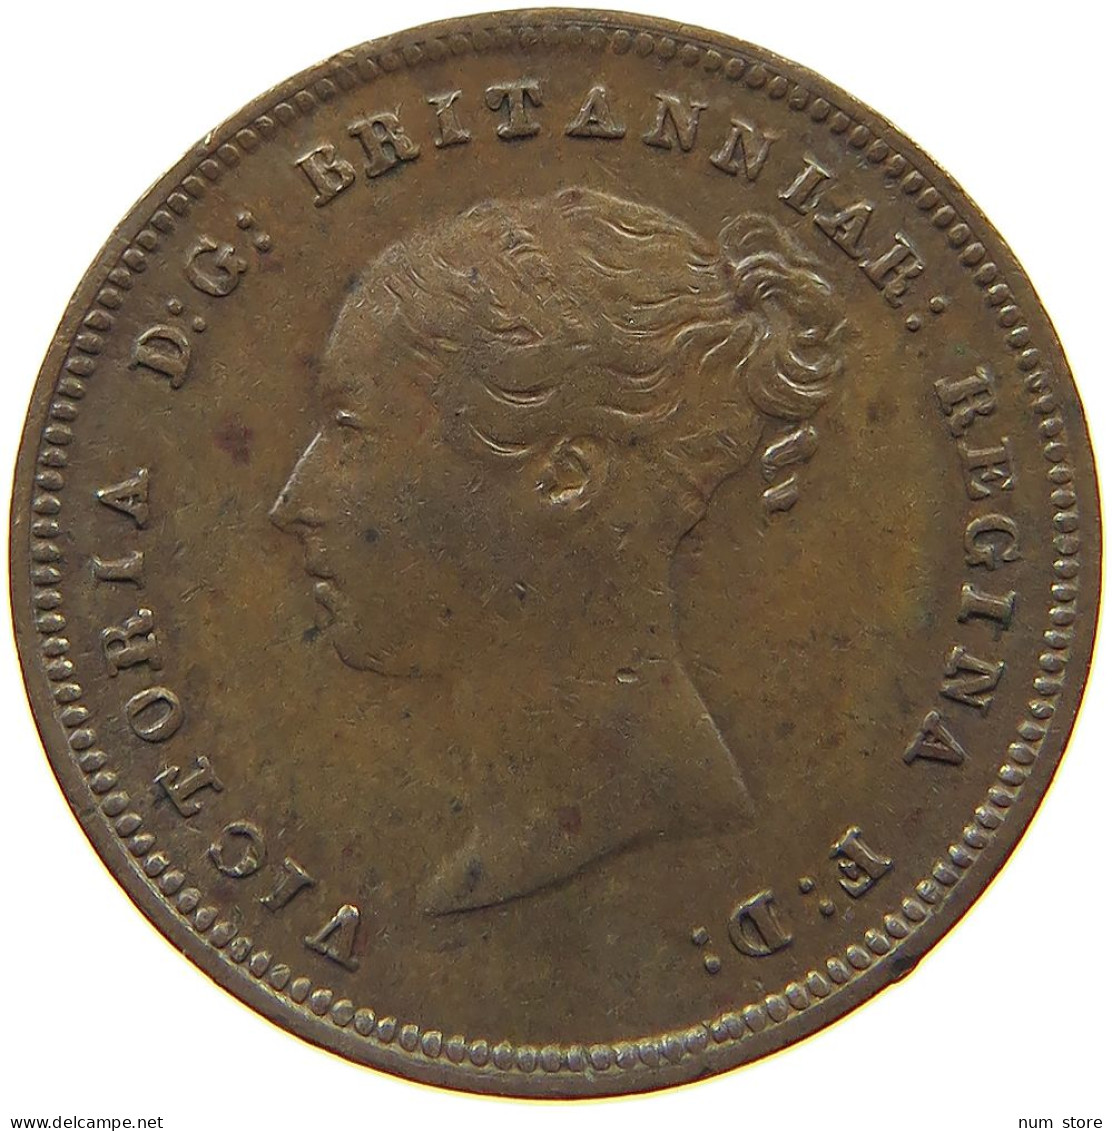 GREAT BRITAIN HALF FARTHING 1843 Victoria 1837-1901 #t004 0223 - A. 1/4 - 1/3 - 1/2 Farthing